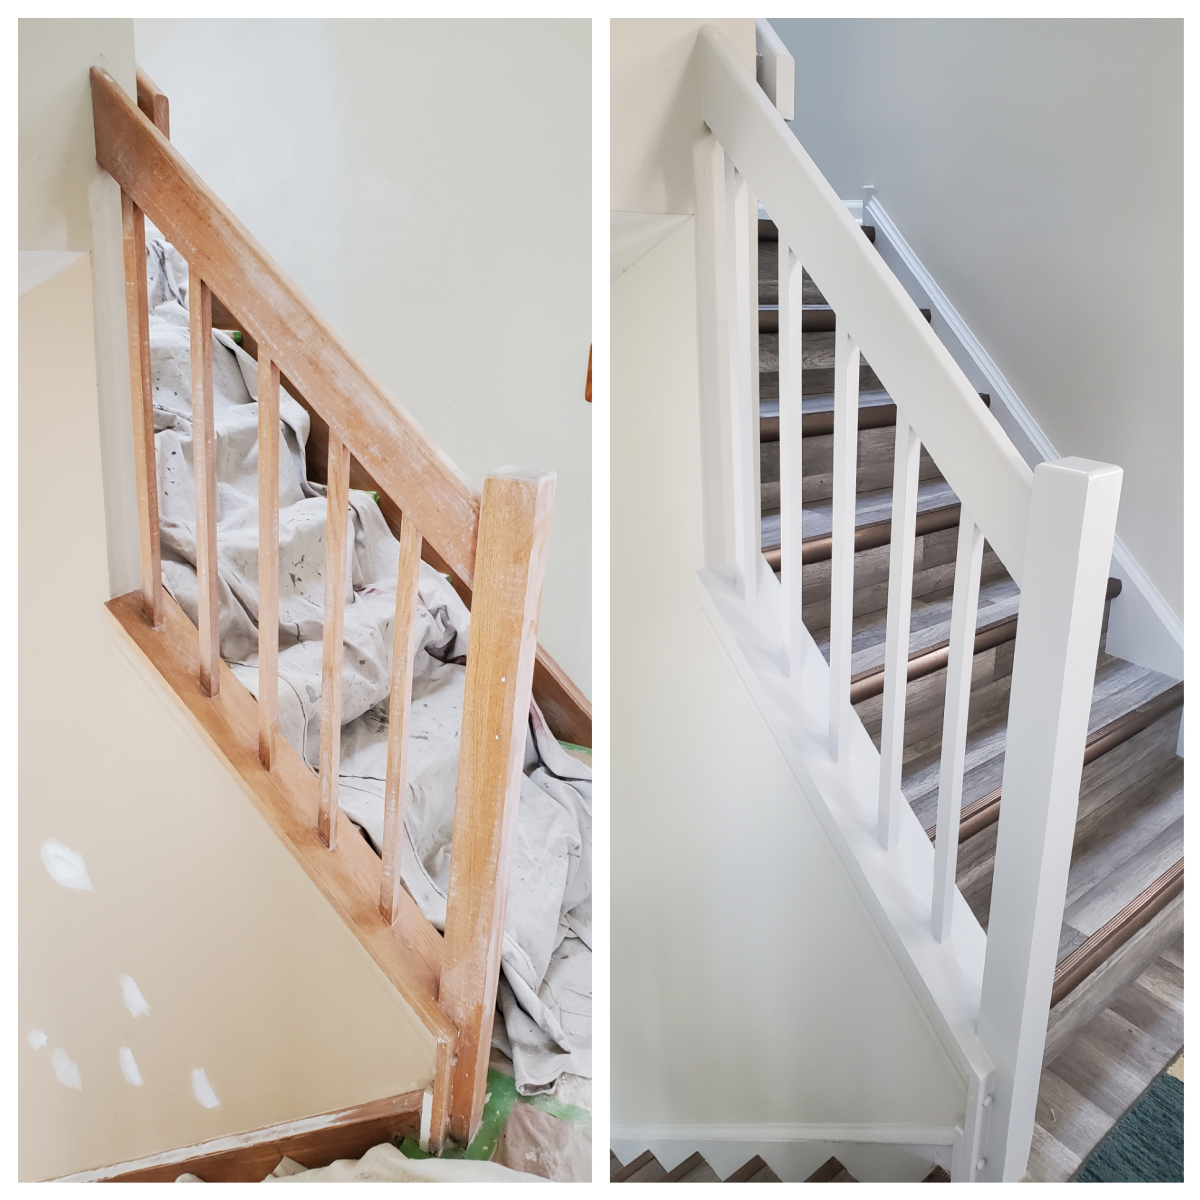 Oak railings and spindles I painted gray. 